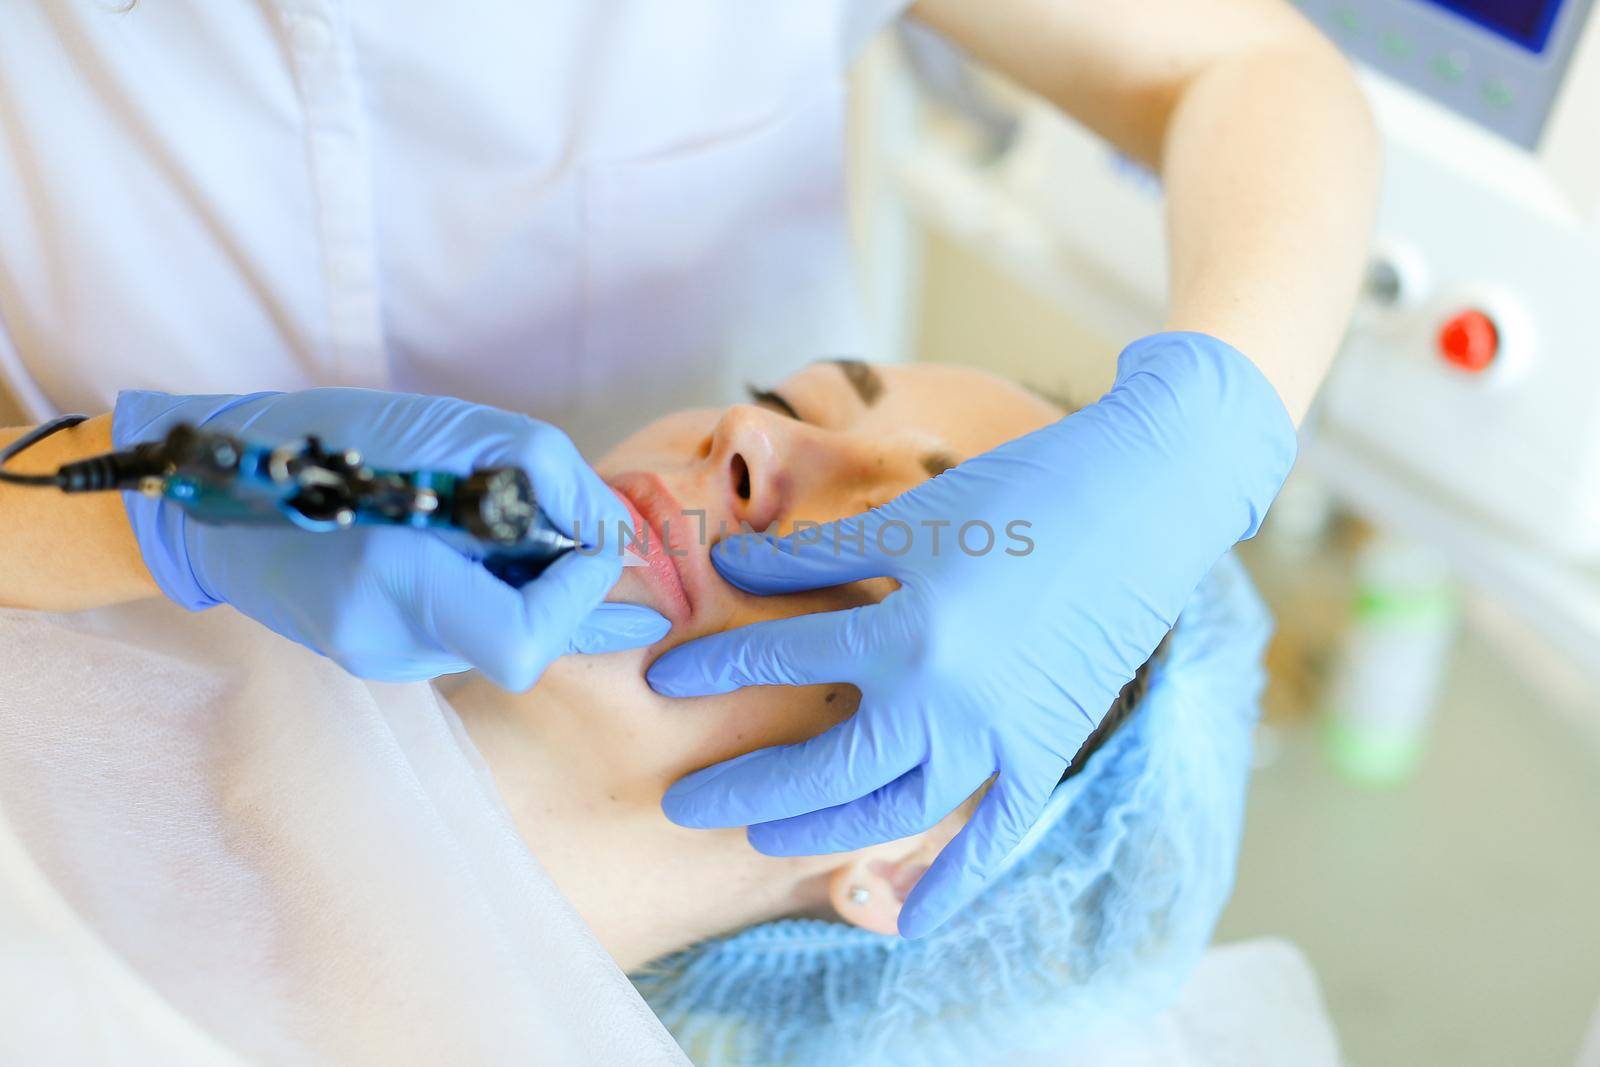 Close up hands in latex gloves making lip tattoo with microblading device. Concept of beauty salon, permanent makeup and cosmetology equipment.